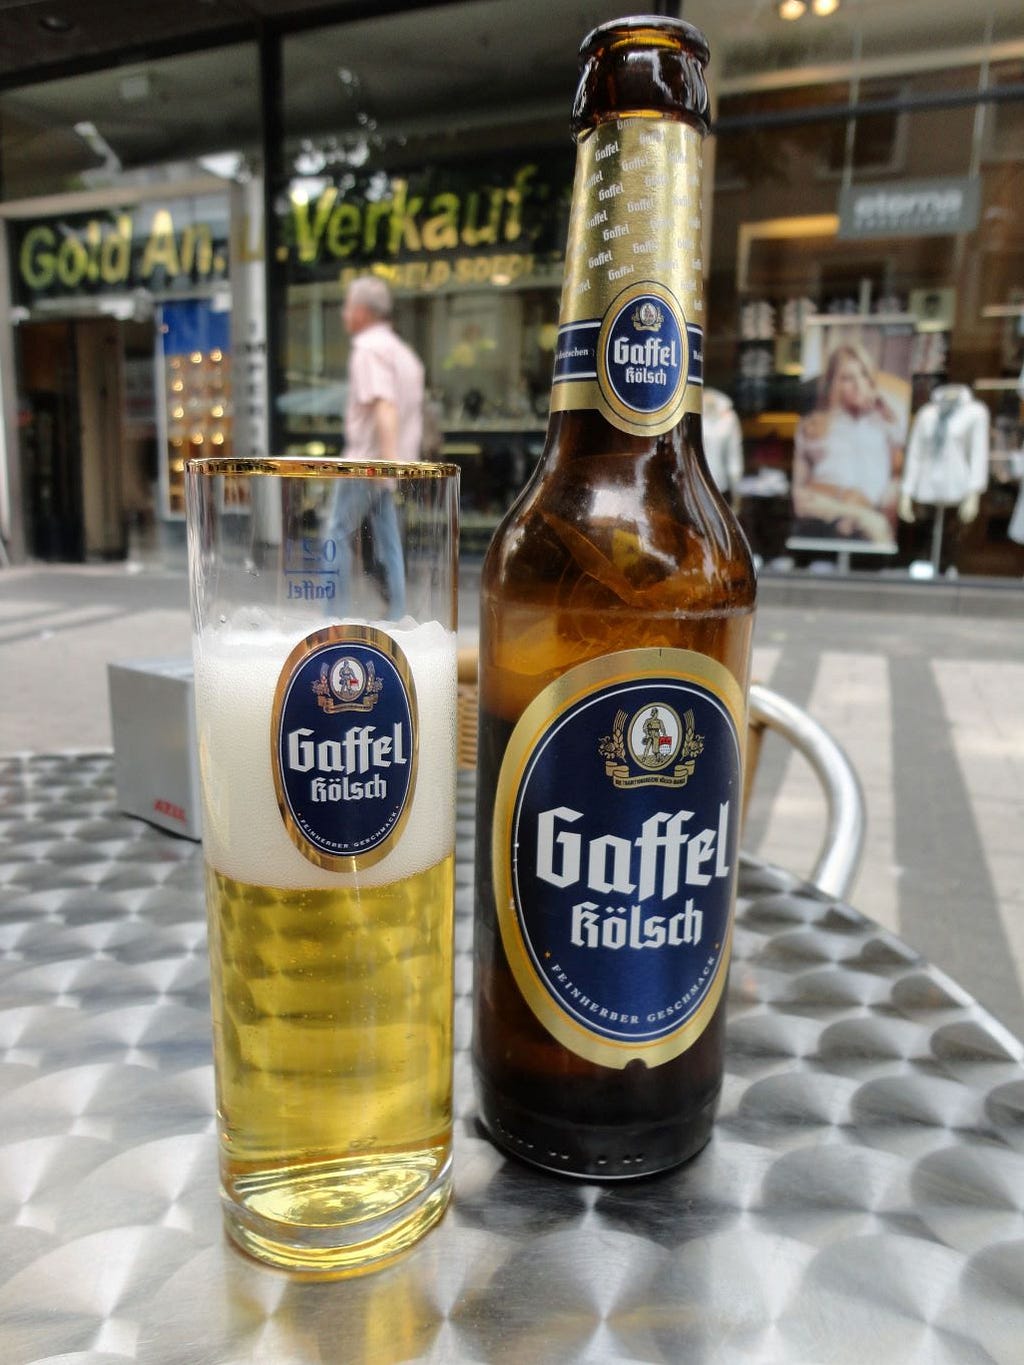 A glass of beer and a beer bottle with the label “Gaffel Kolsch” on a brushed metal outdoor table.